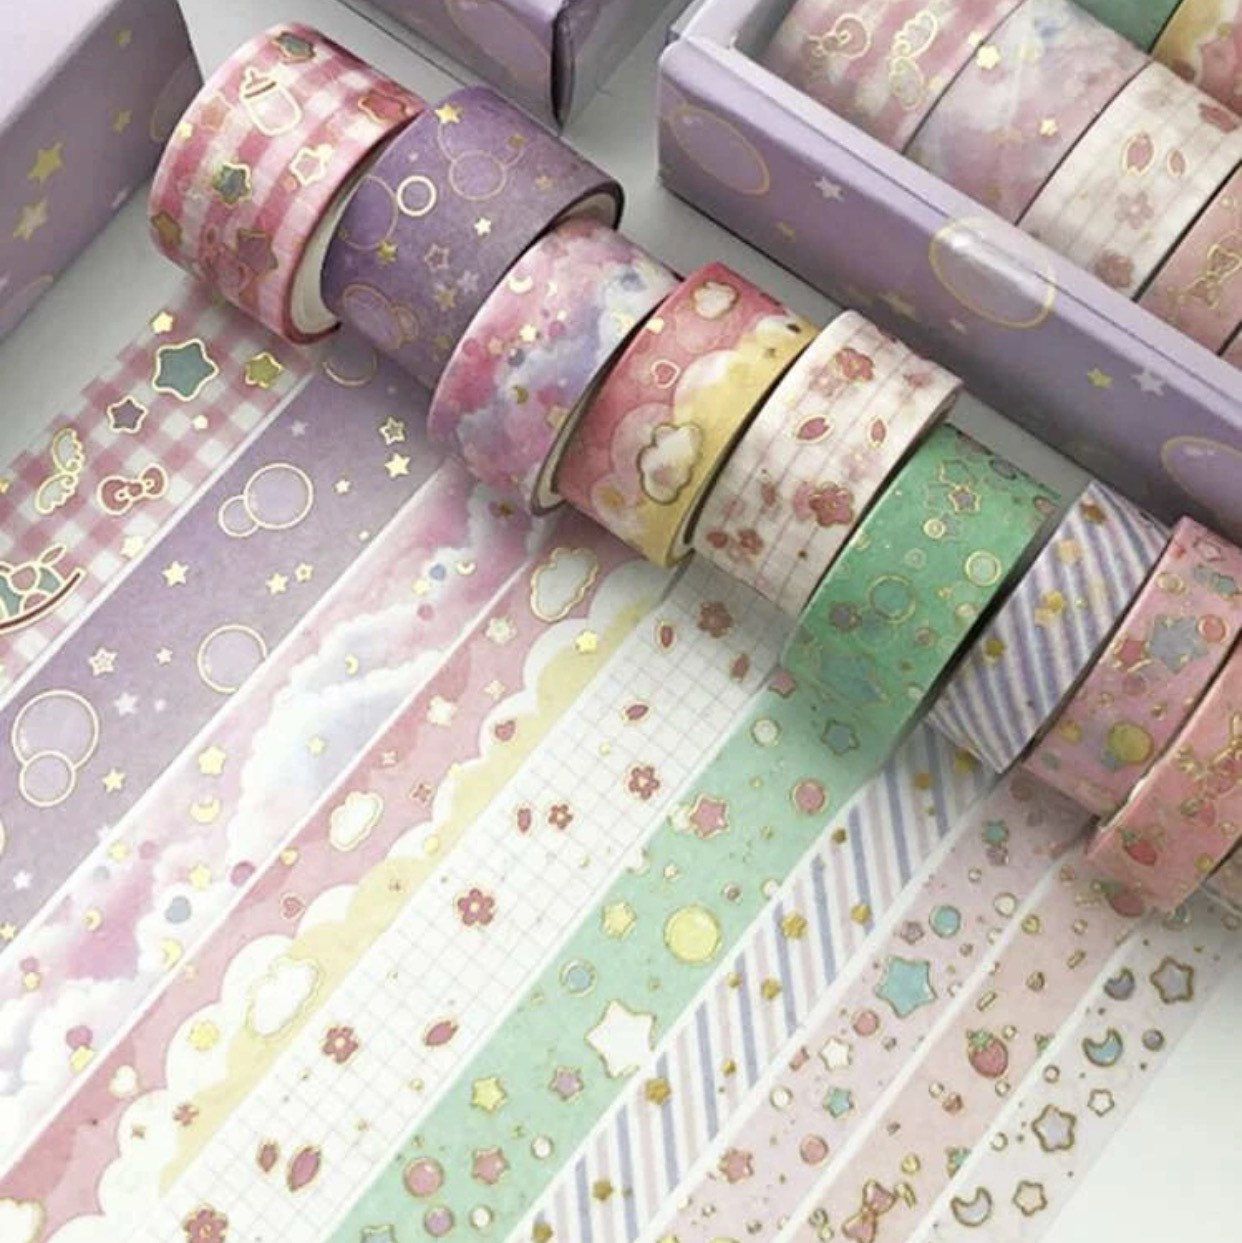 What is washi tape and how do I use it?